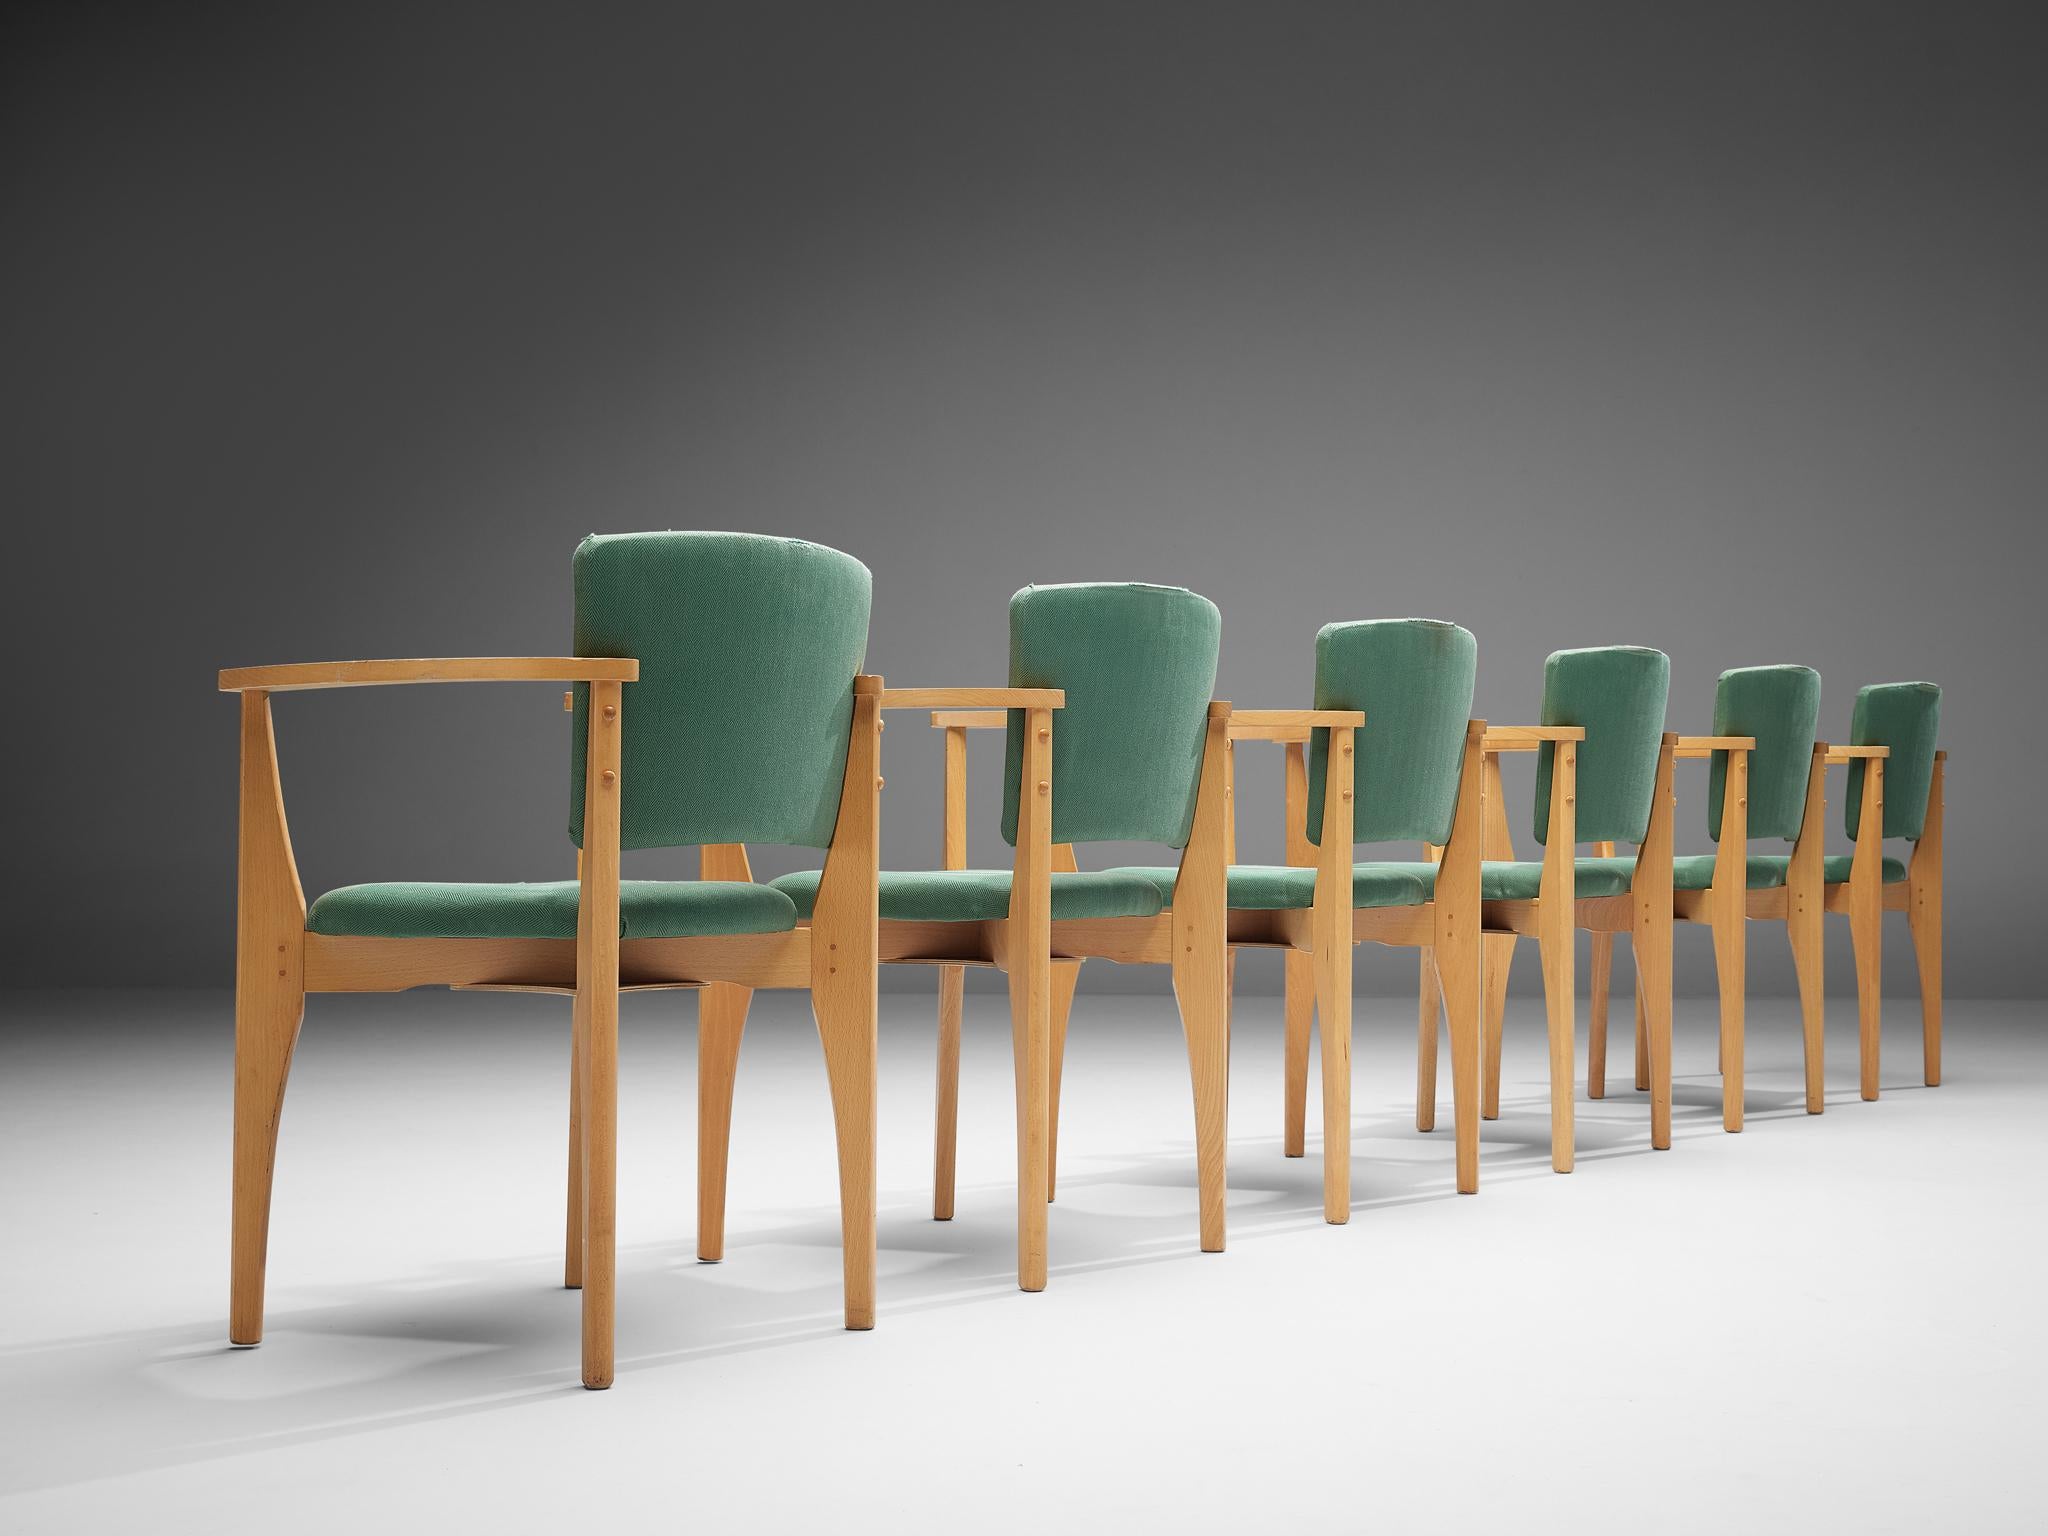 Dining chairs, beech, green fabric upholstery, Europe, 1960s

These dining chairs have bright frames in beech. They feature rounded armrests that are connected to the legs in front and at the back. The legs are placed underneath the ends of the